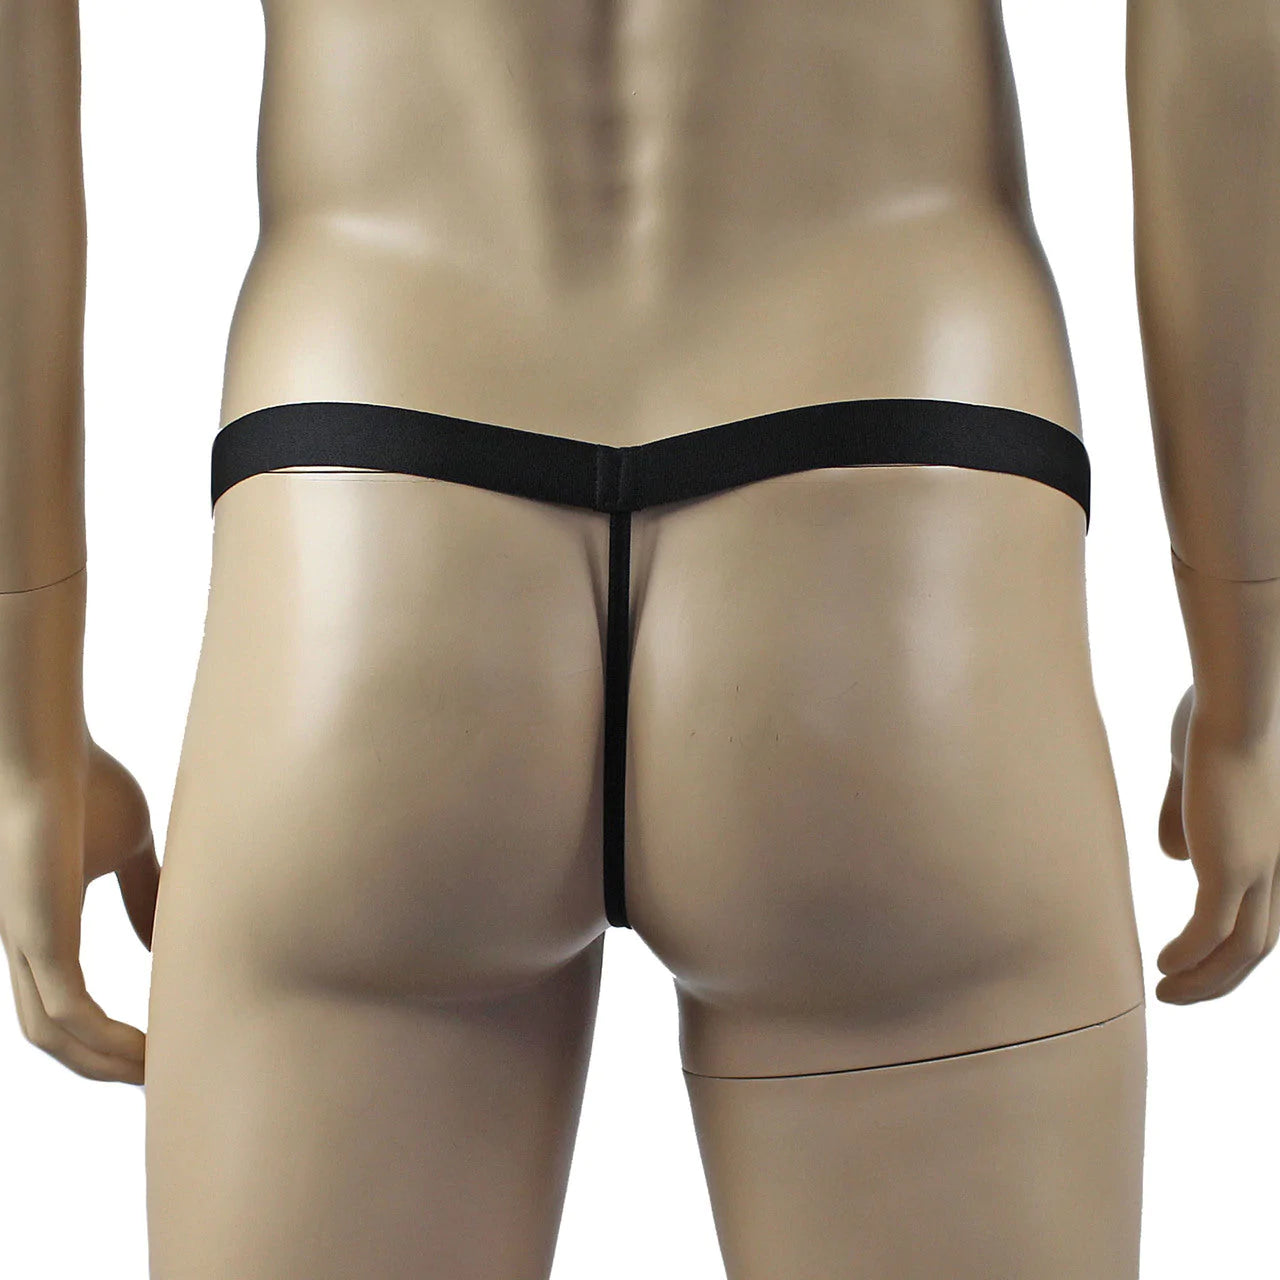 SALE - Male Willie G string Thong with Naughty Print Black and White